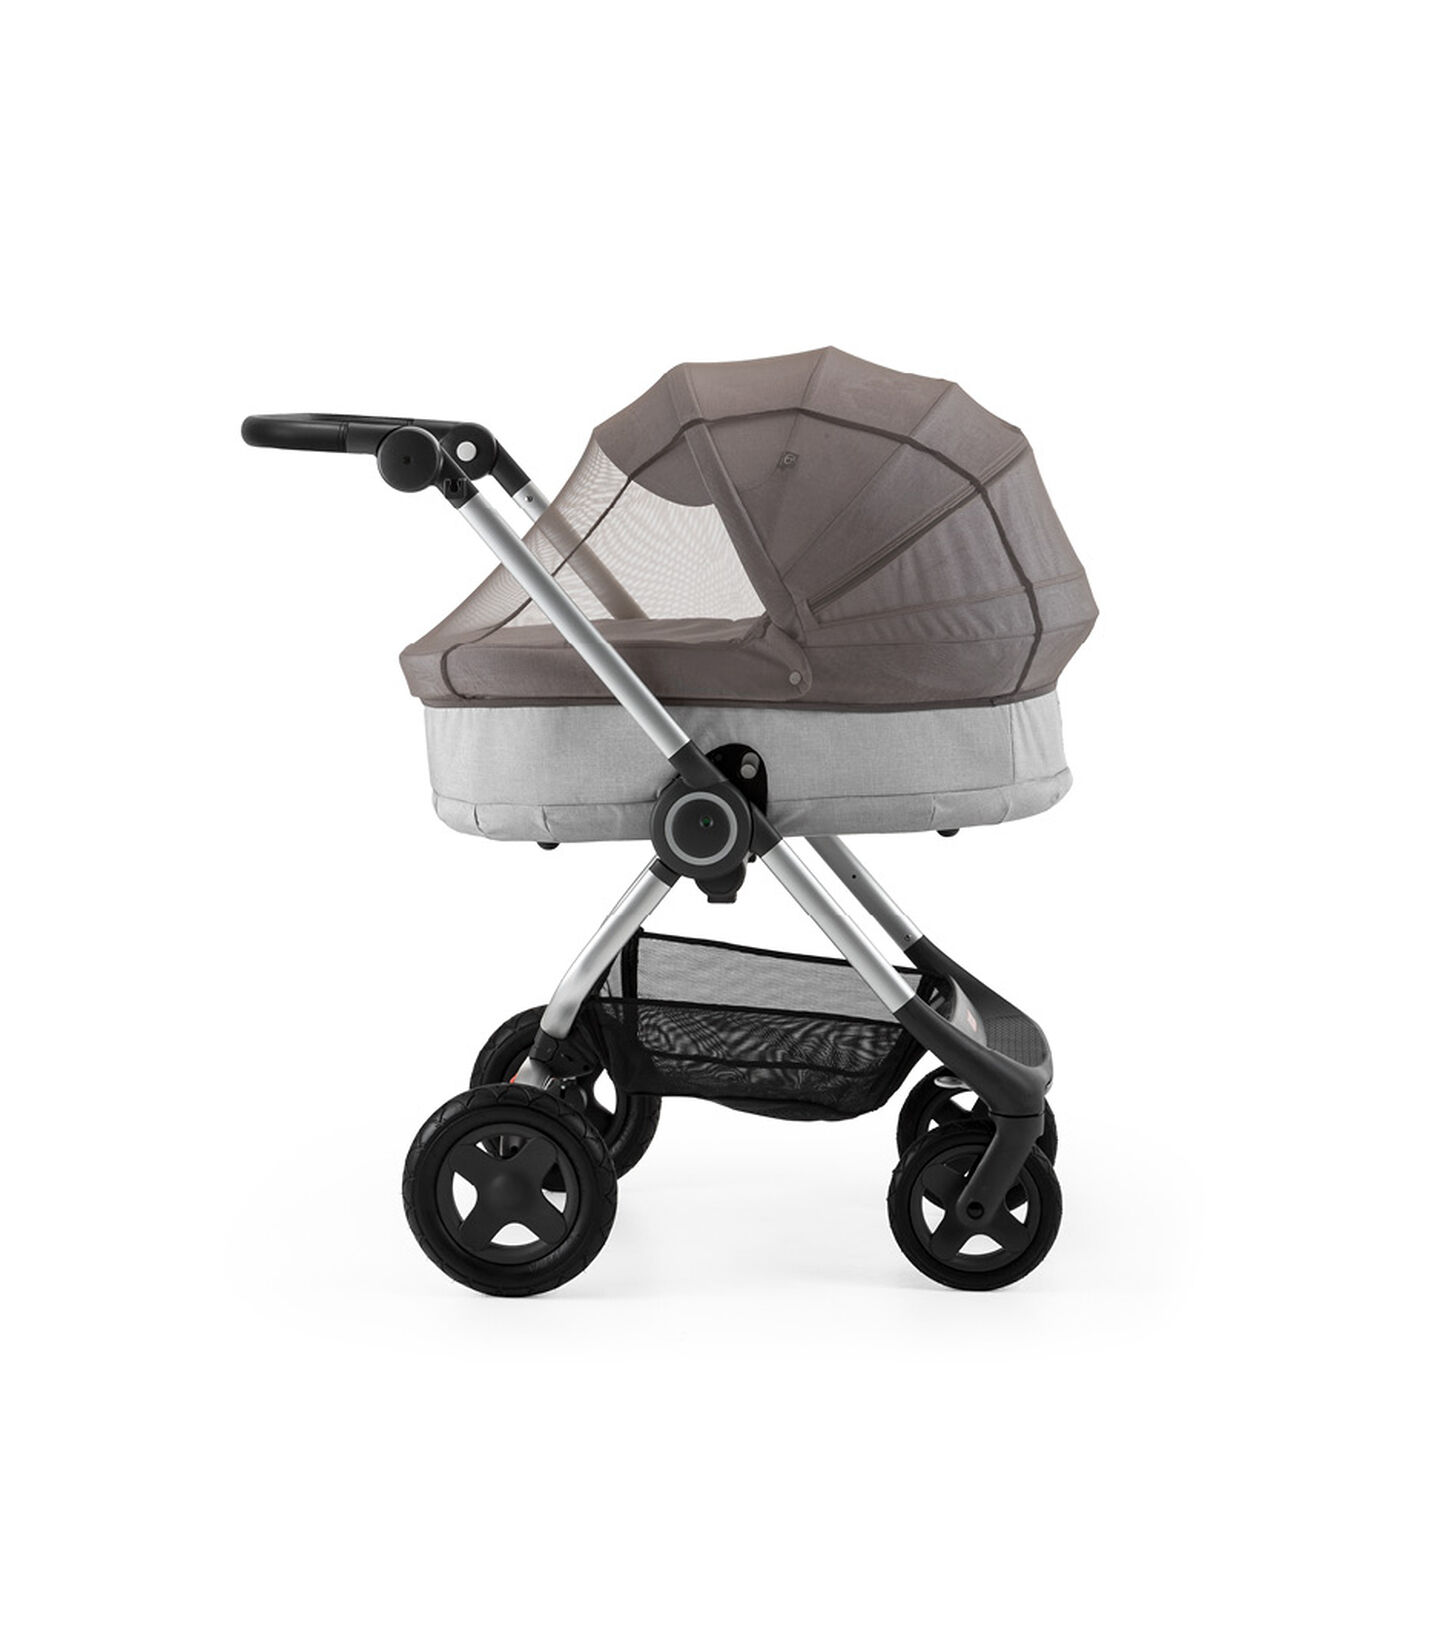 Stokke® Scoot™ Grijs anti-insectennet, , mainview view 2